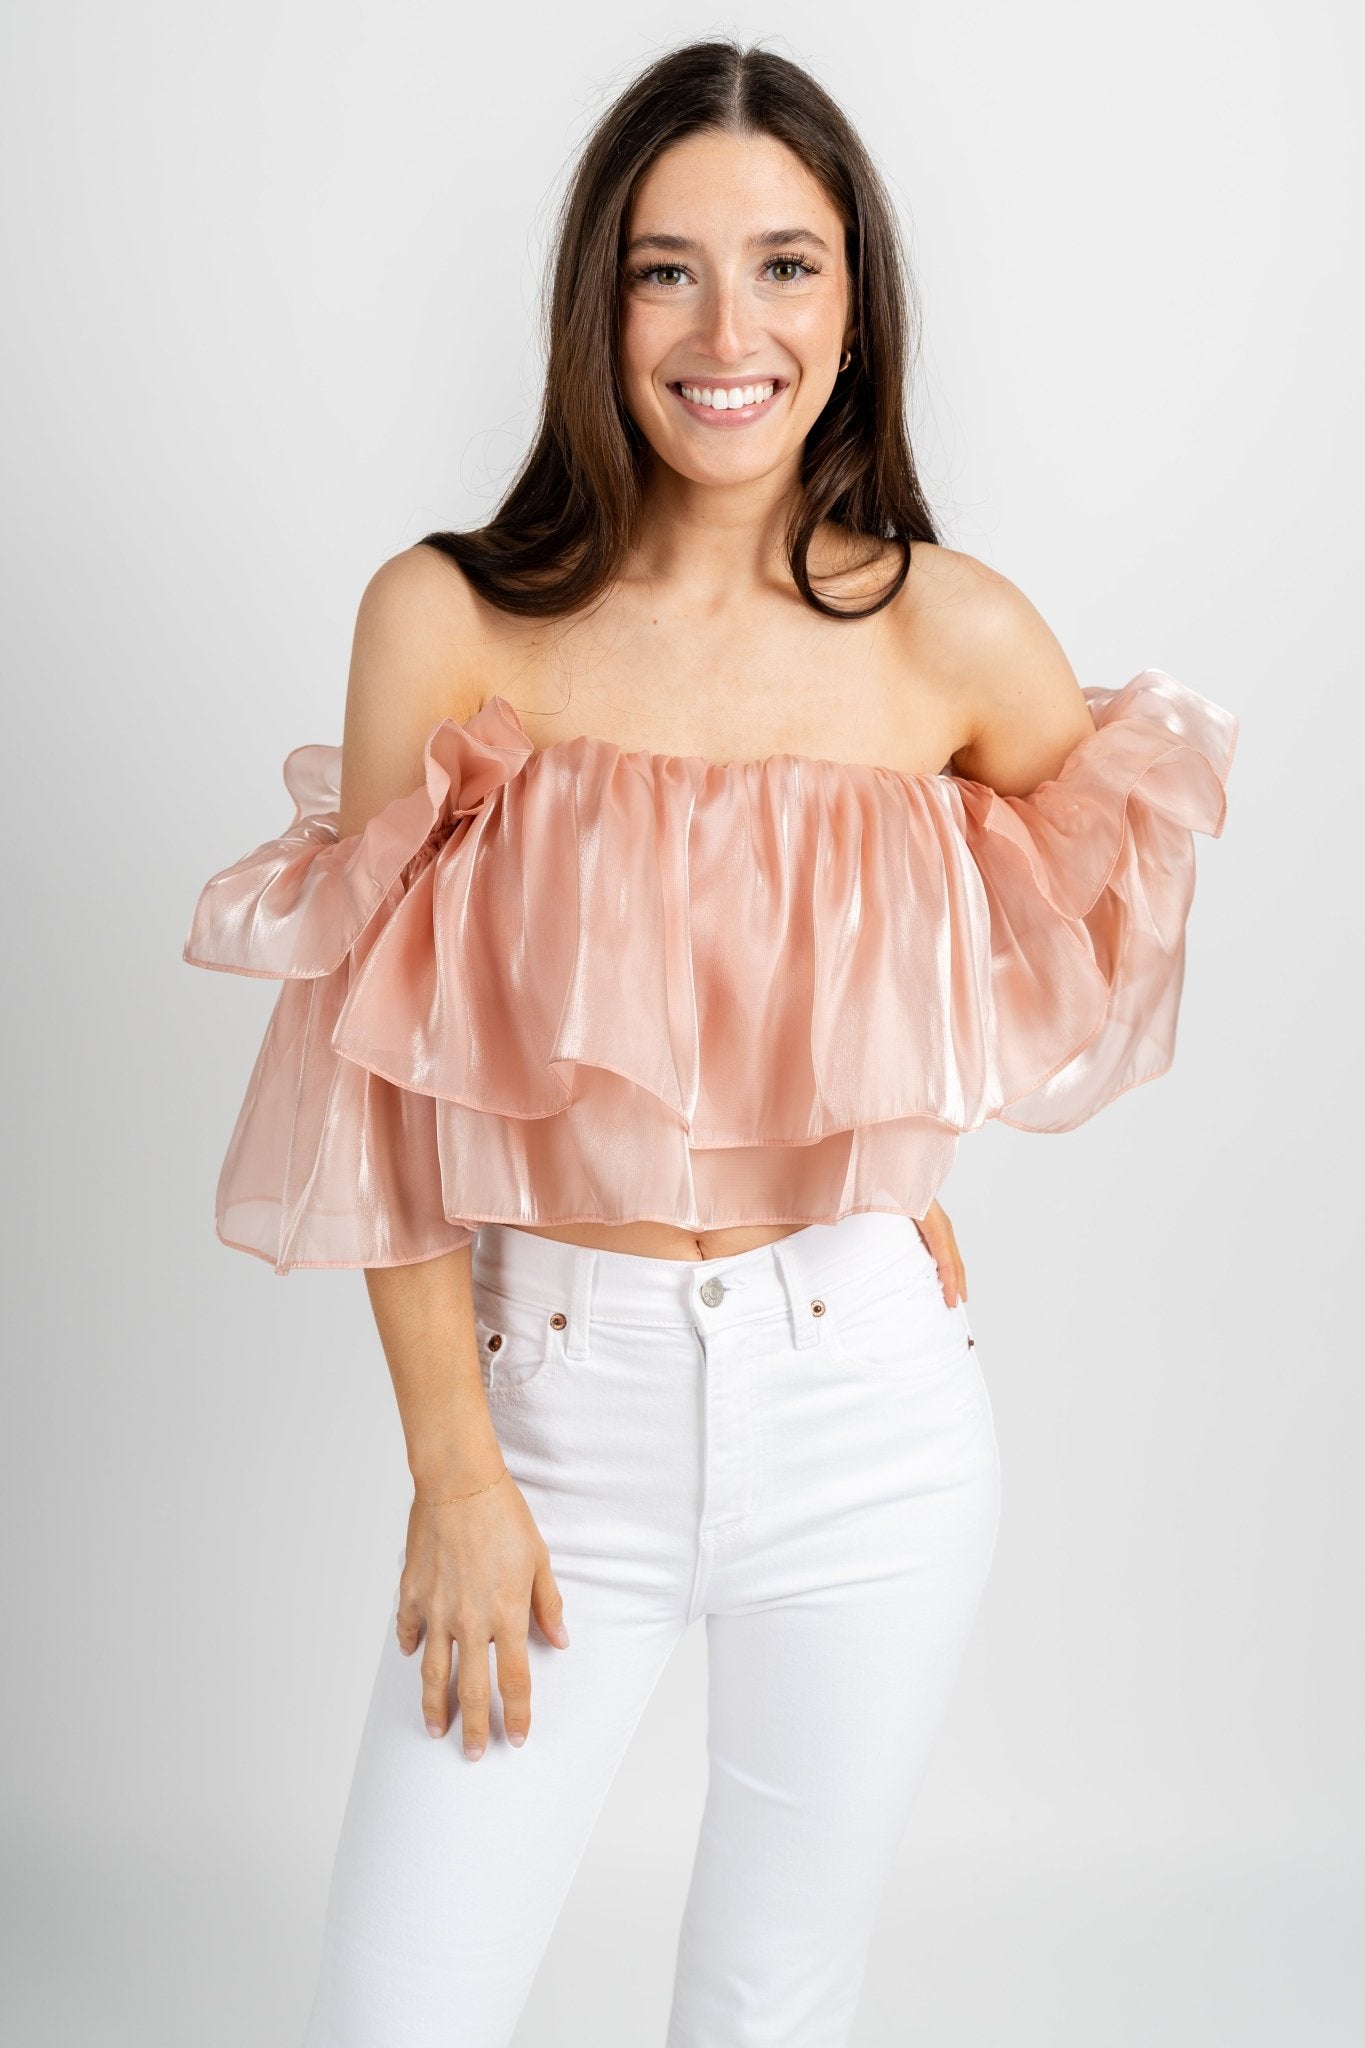 Ruffle off shoulder top blush - Stylish Top - Cute Easter Outfits at Lush Fashion Lounge Boutique in Oklahoma